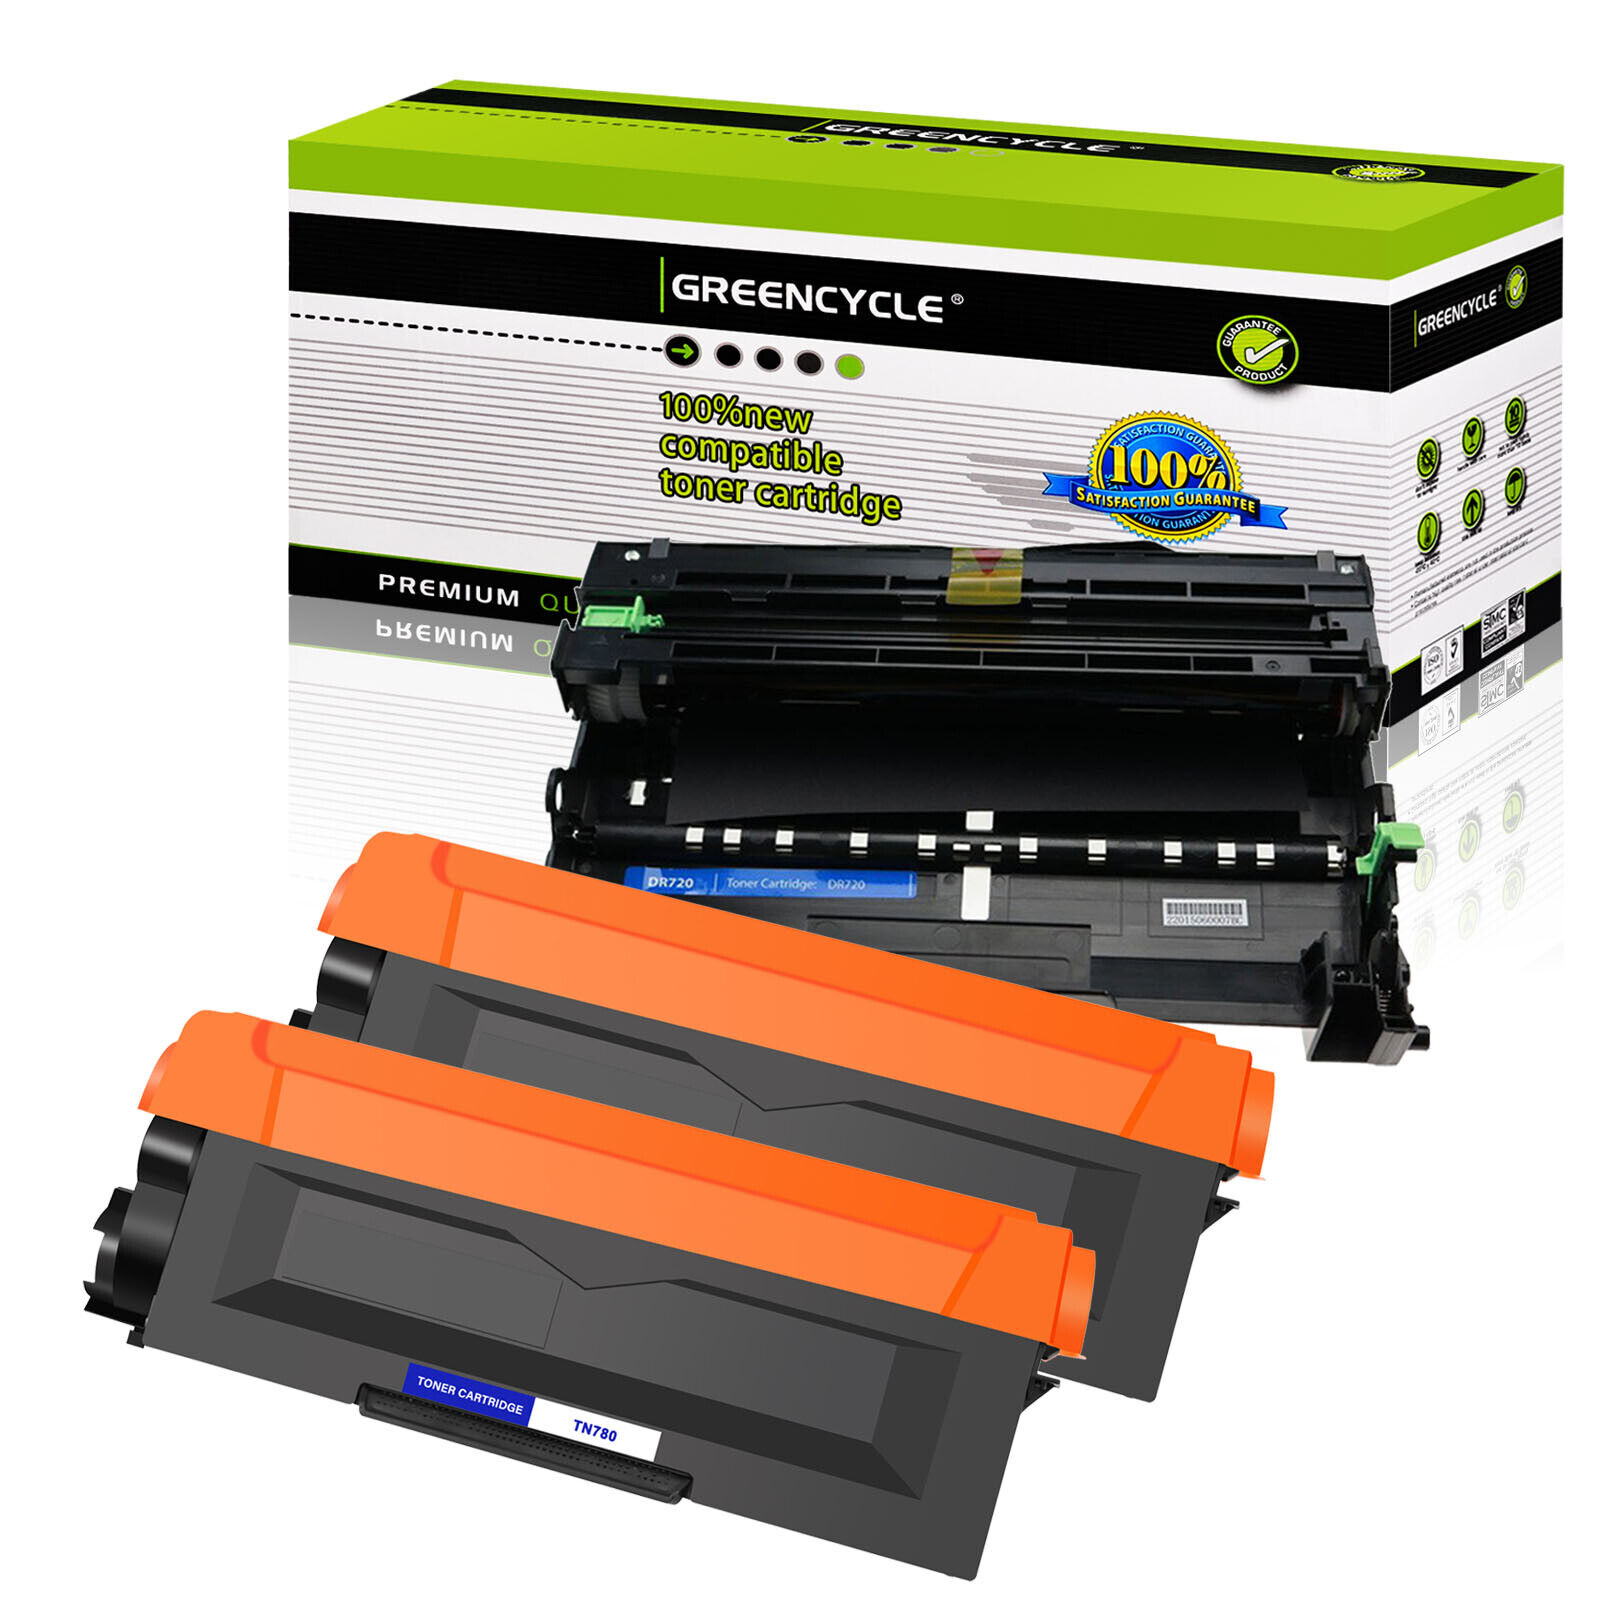 2 TN780 Toner Cartridge + 1 DR720 Drum For Brother MFC-8710DW MFC-8510DN 8515DN